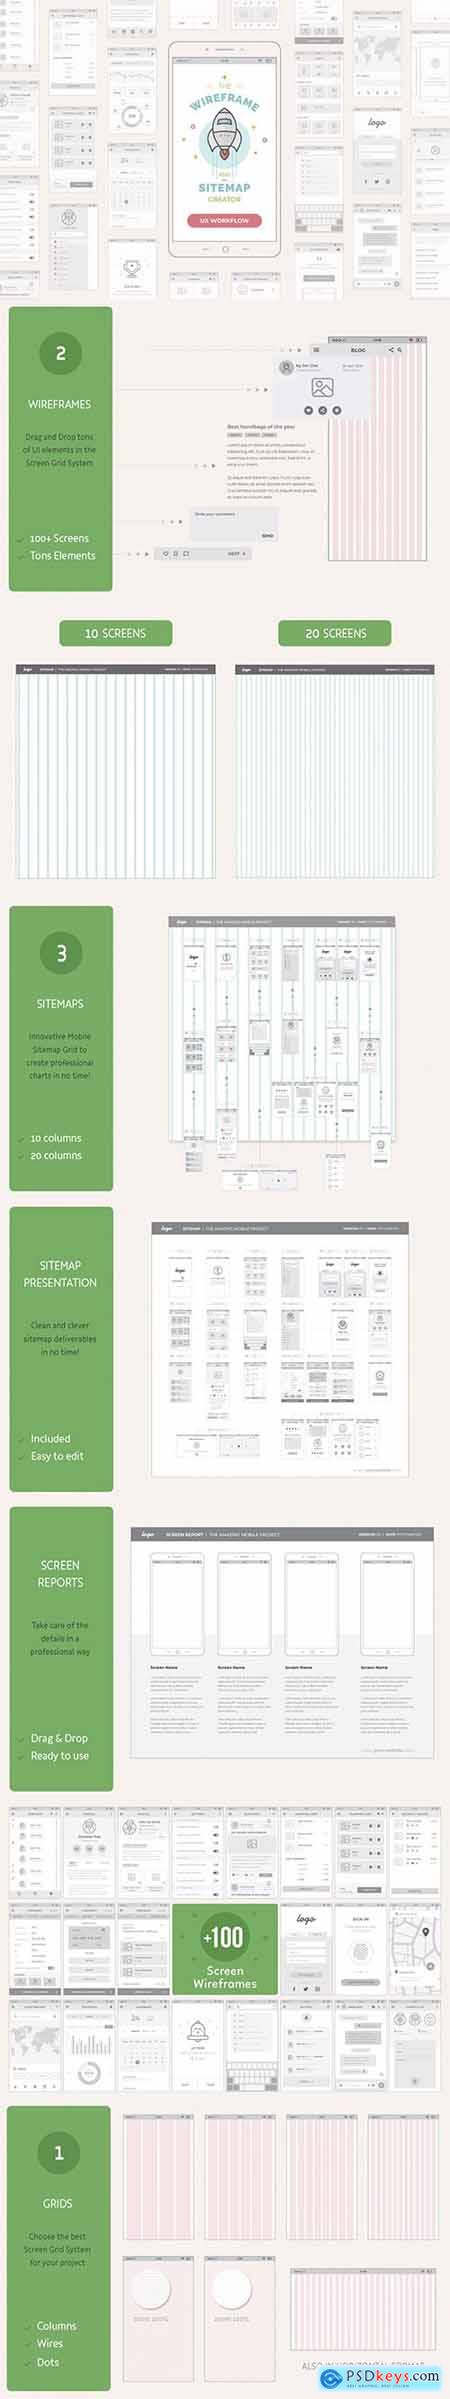 Download UX Workflow - Mobile Wireframe and Sitemap Creator » Free Download Photoshop Vector Stock image ...